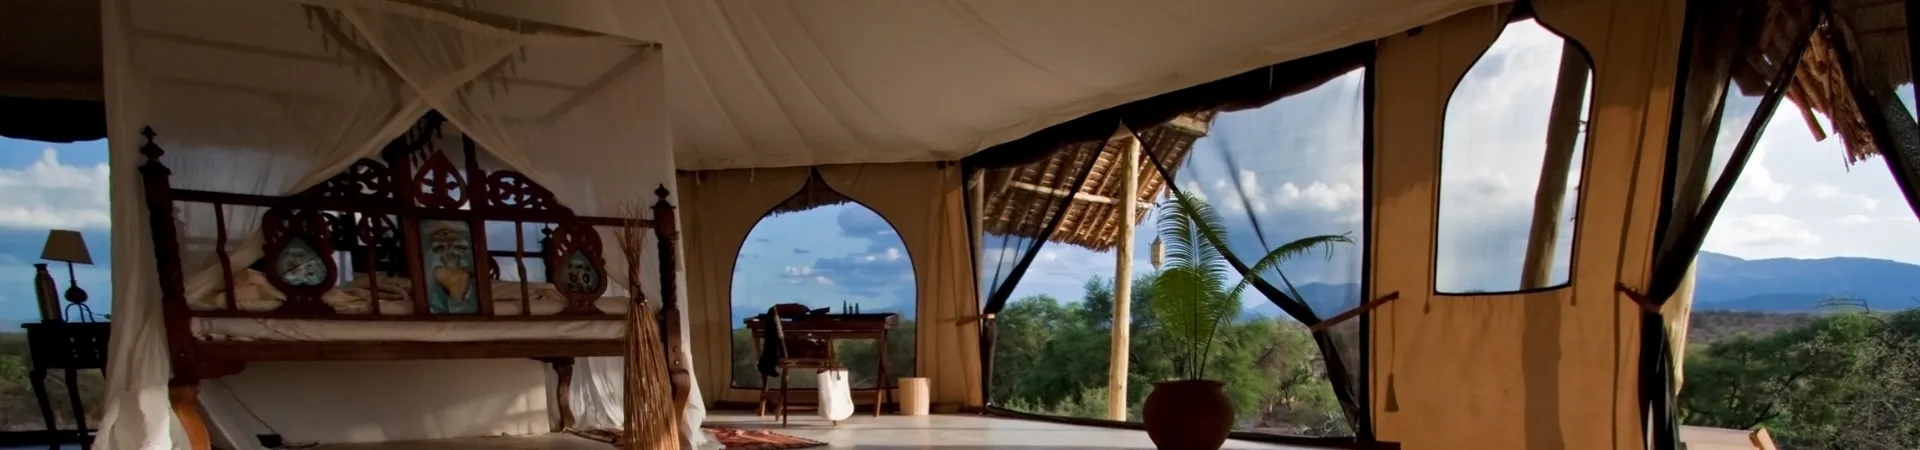 A room with a canopy bed and a view of the mountains.